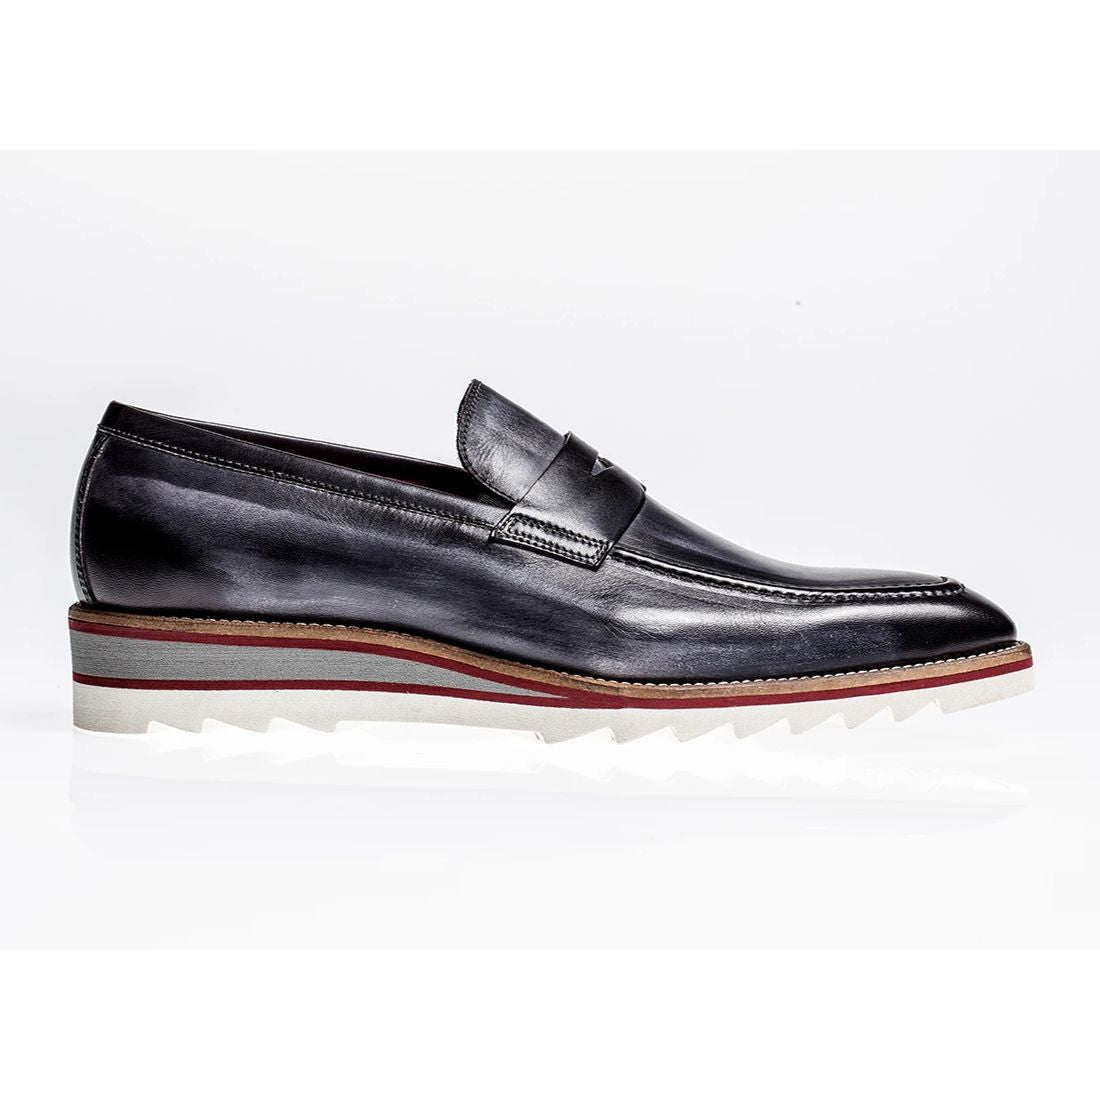 Amberes Sport Loafer in Anthracite by Jose Real